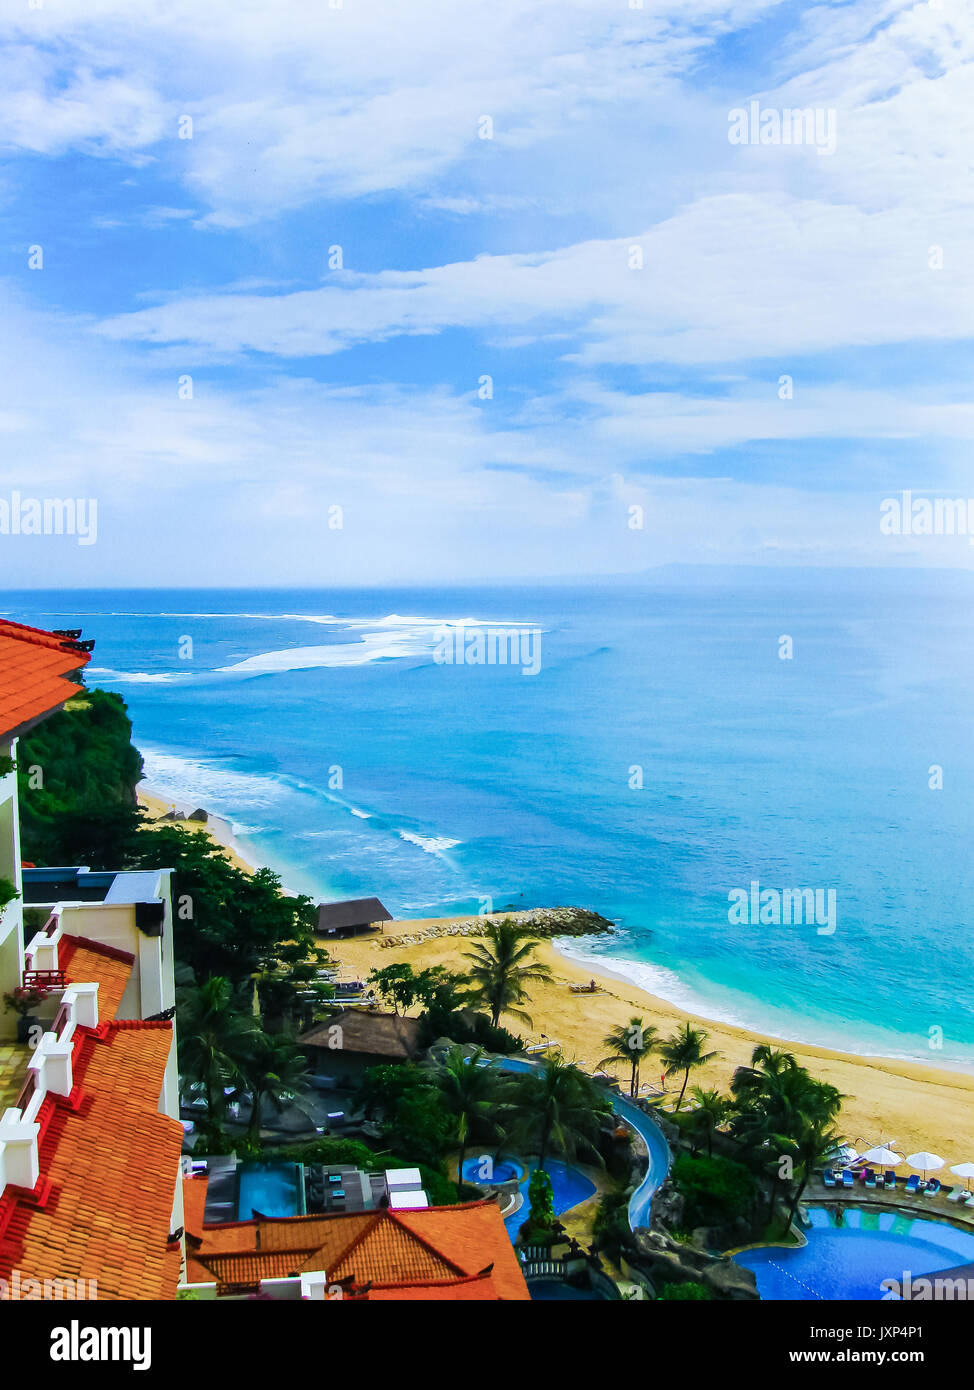 Bali, Indonesia - December 30, 2008: The beach of ocean and Nusa Stock Photo